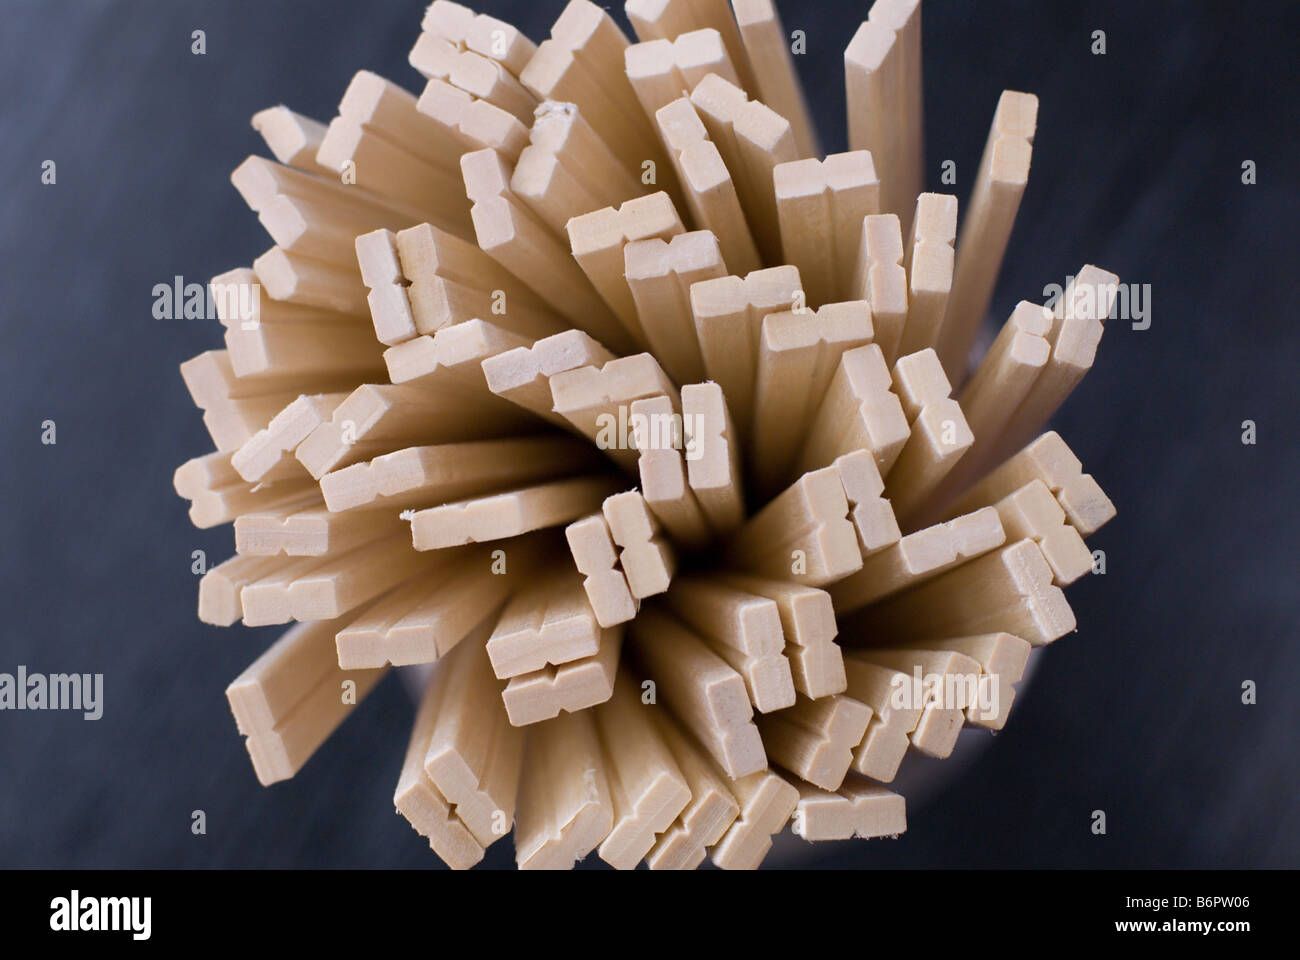 Waribashi or disposable wooden chopsticks as seen from above. Stock Photo